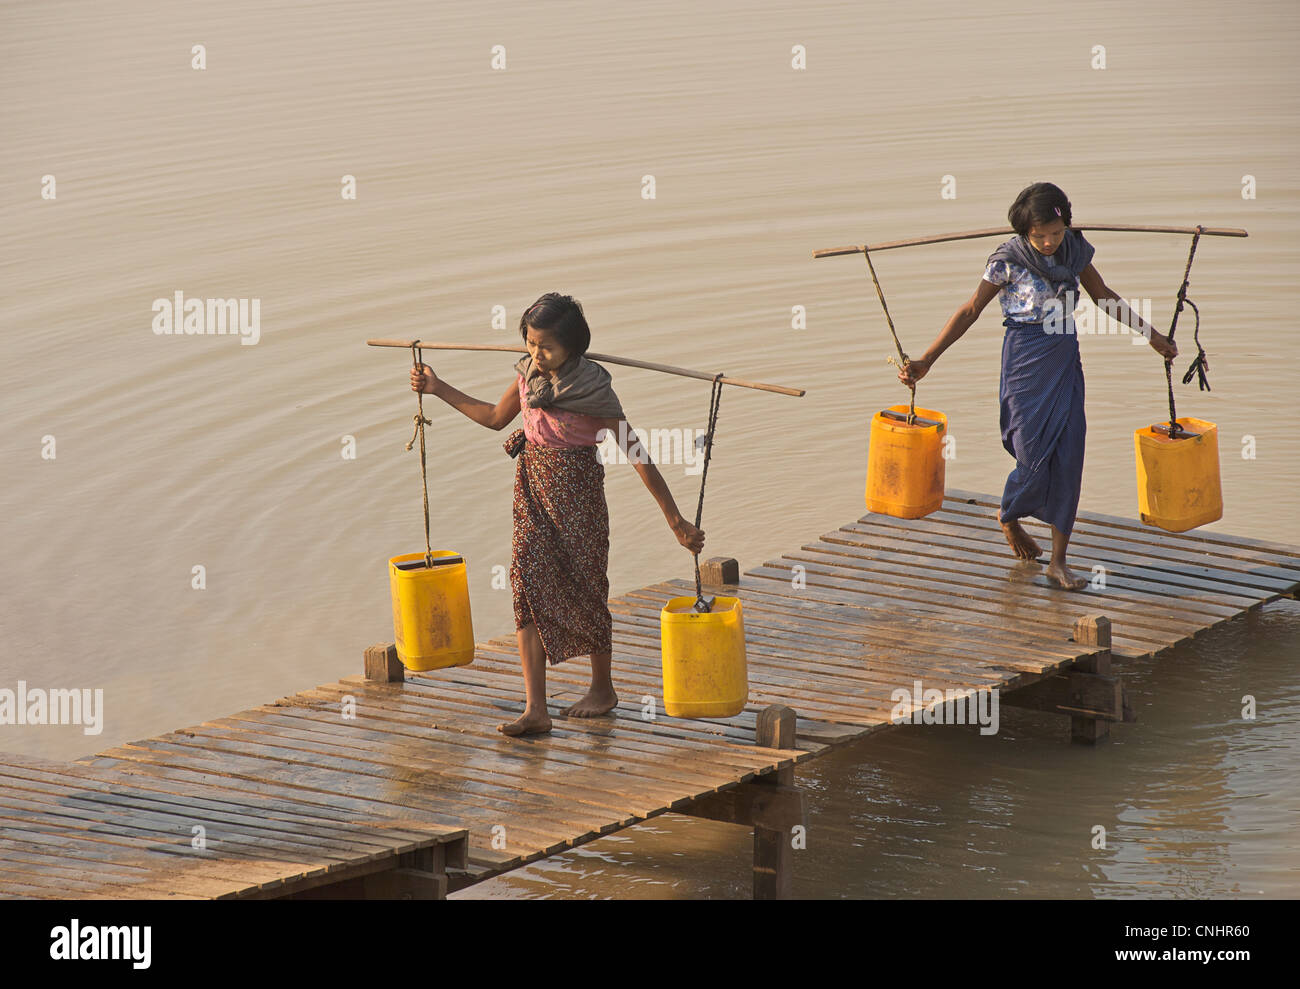 Collecting water from a reservoir between Mount Popa and Bagan Burma. Myanmar. Water Festival preparations Stock Photo